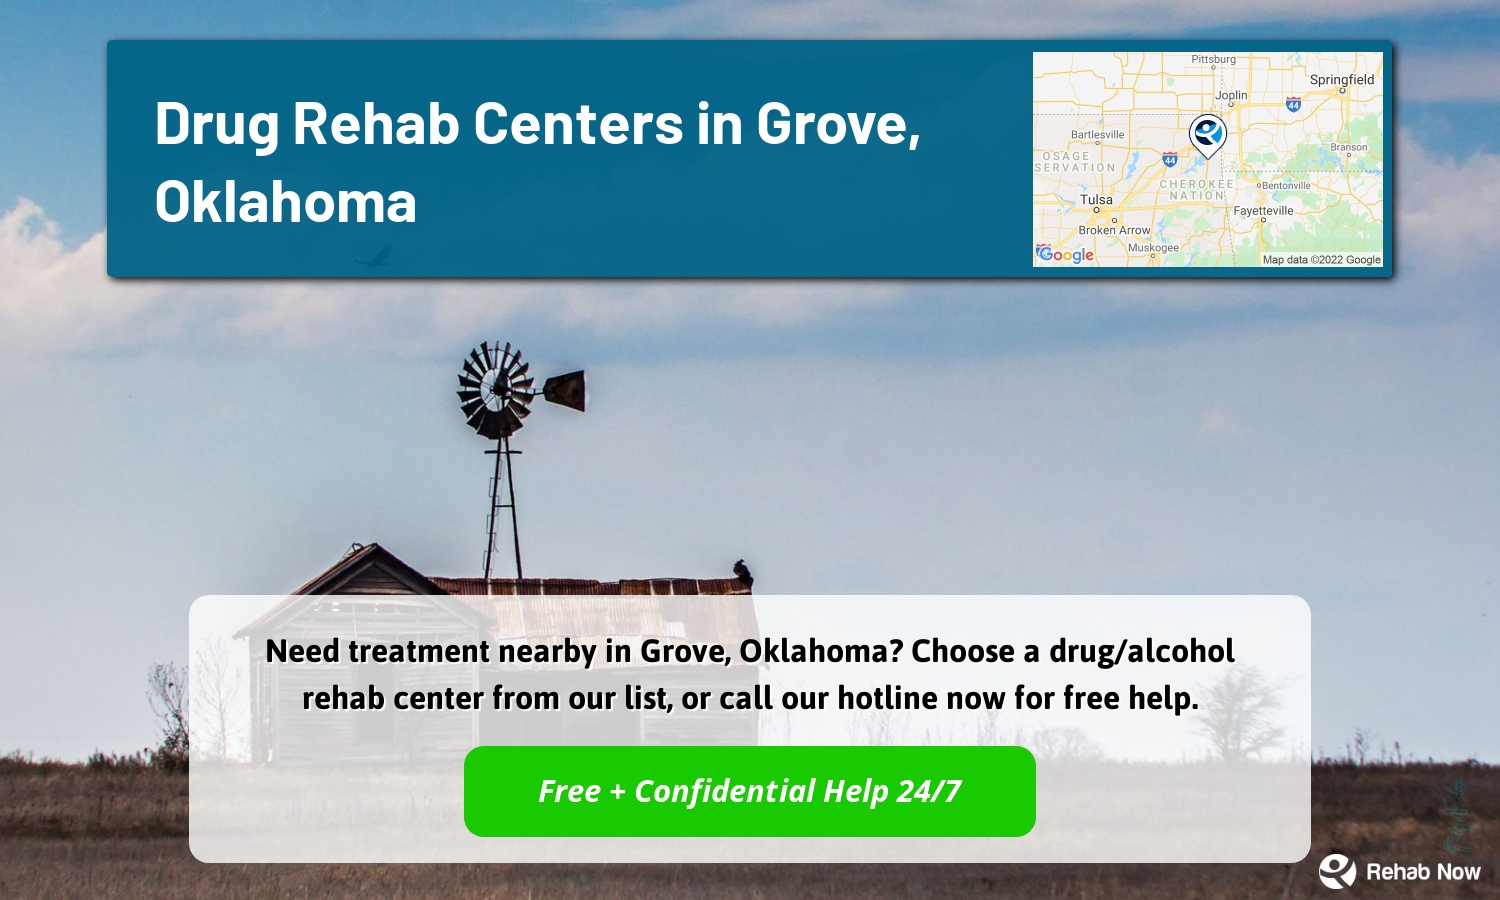 Need treatment nearby in Grove, Oklahoma? Choose a drug/alcohol rehab center from our list, or call our hotline now for free help.